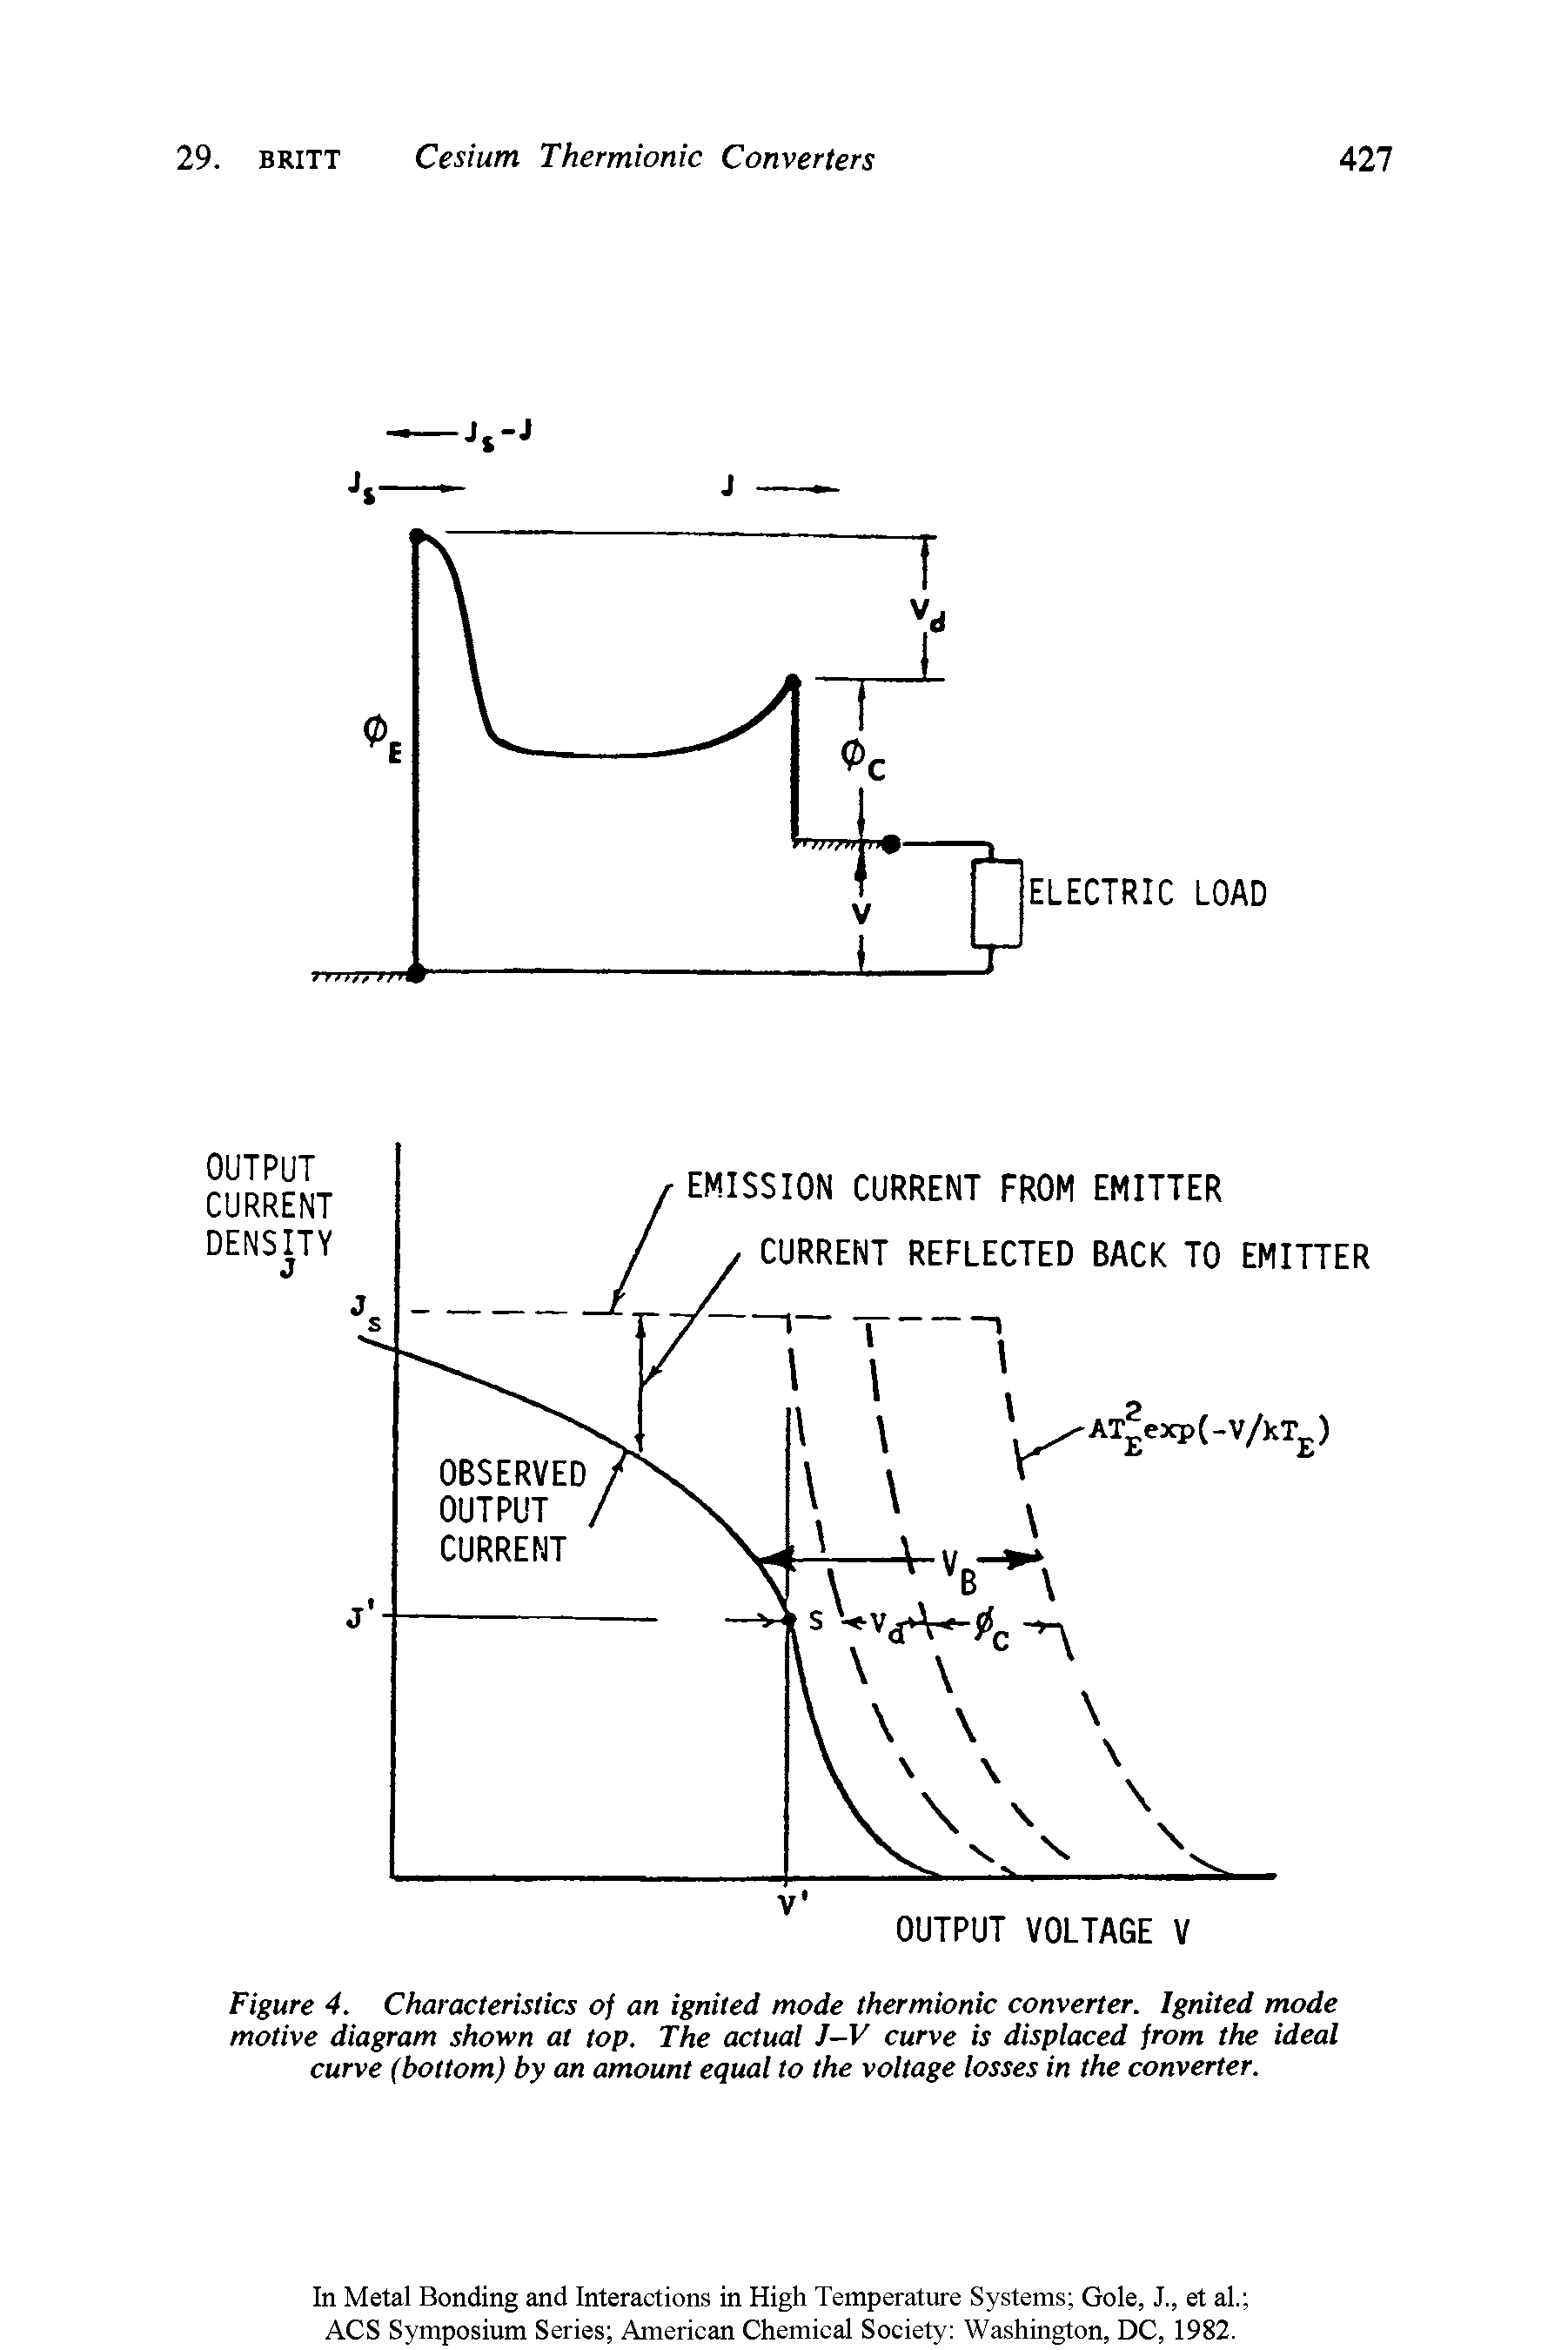 Figure 4. Characteristics of an ignited mode thermionic converter. Ignited mode motive diagram shown at top. The actual J-V curve is displaced from the ideal curve (bottom) by an amount equal to the voltage losses in the converter.